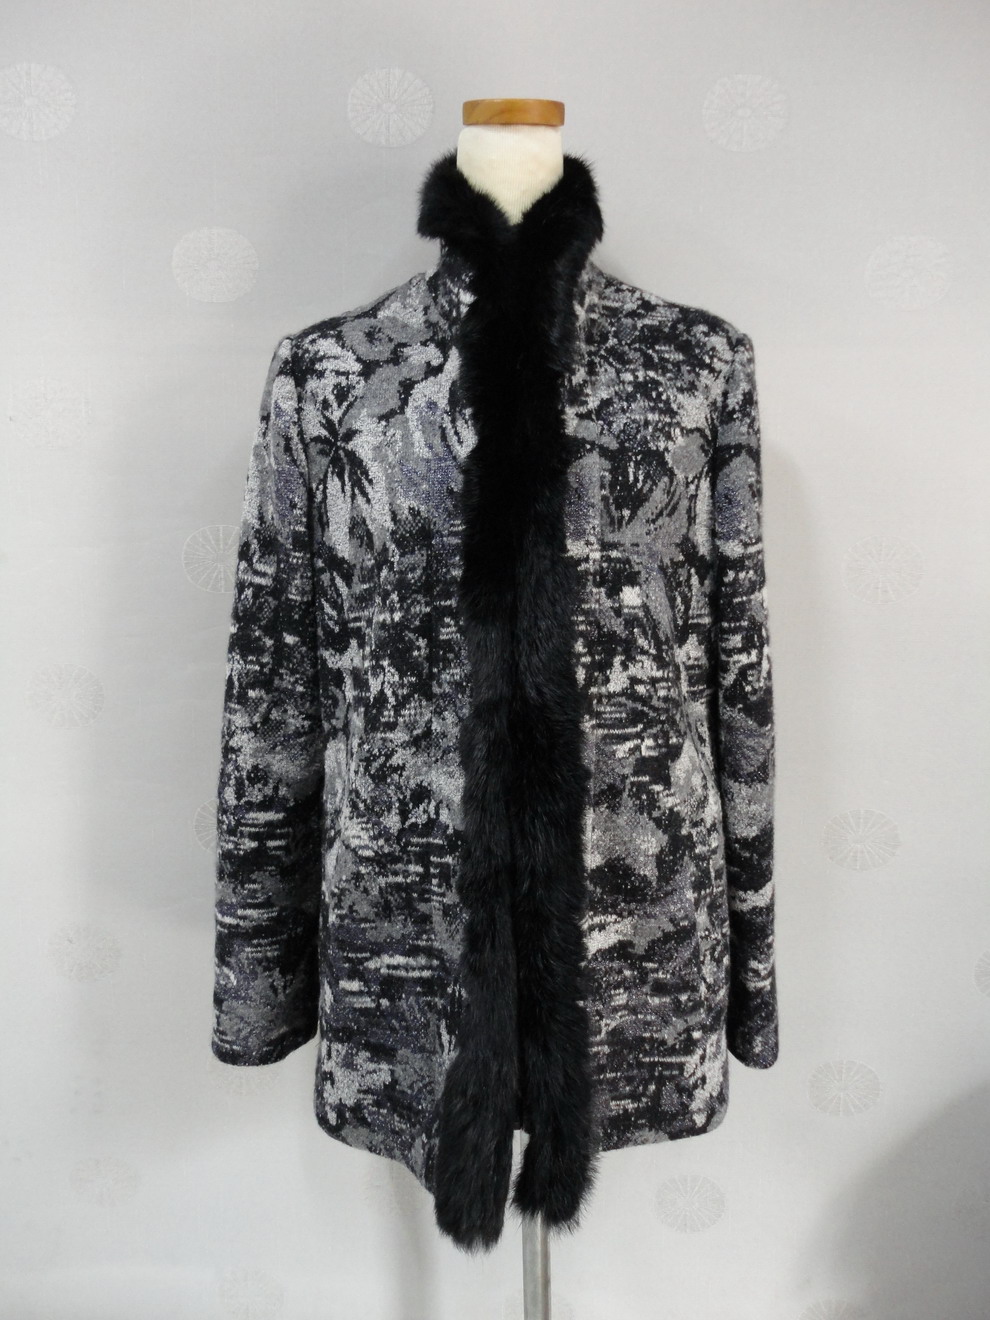 FANCY AND UNIQUE COAT NSC-201 Made in Korea